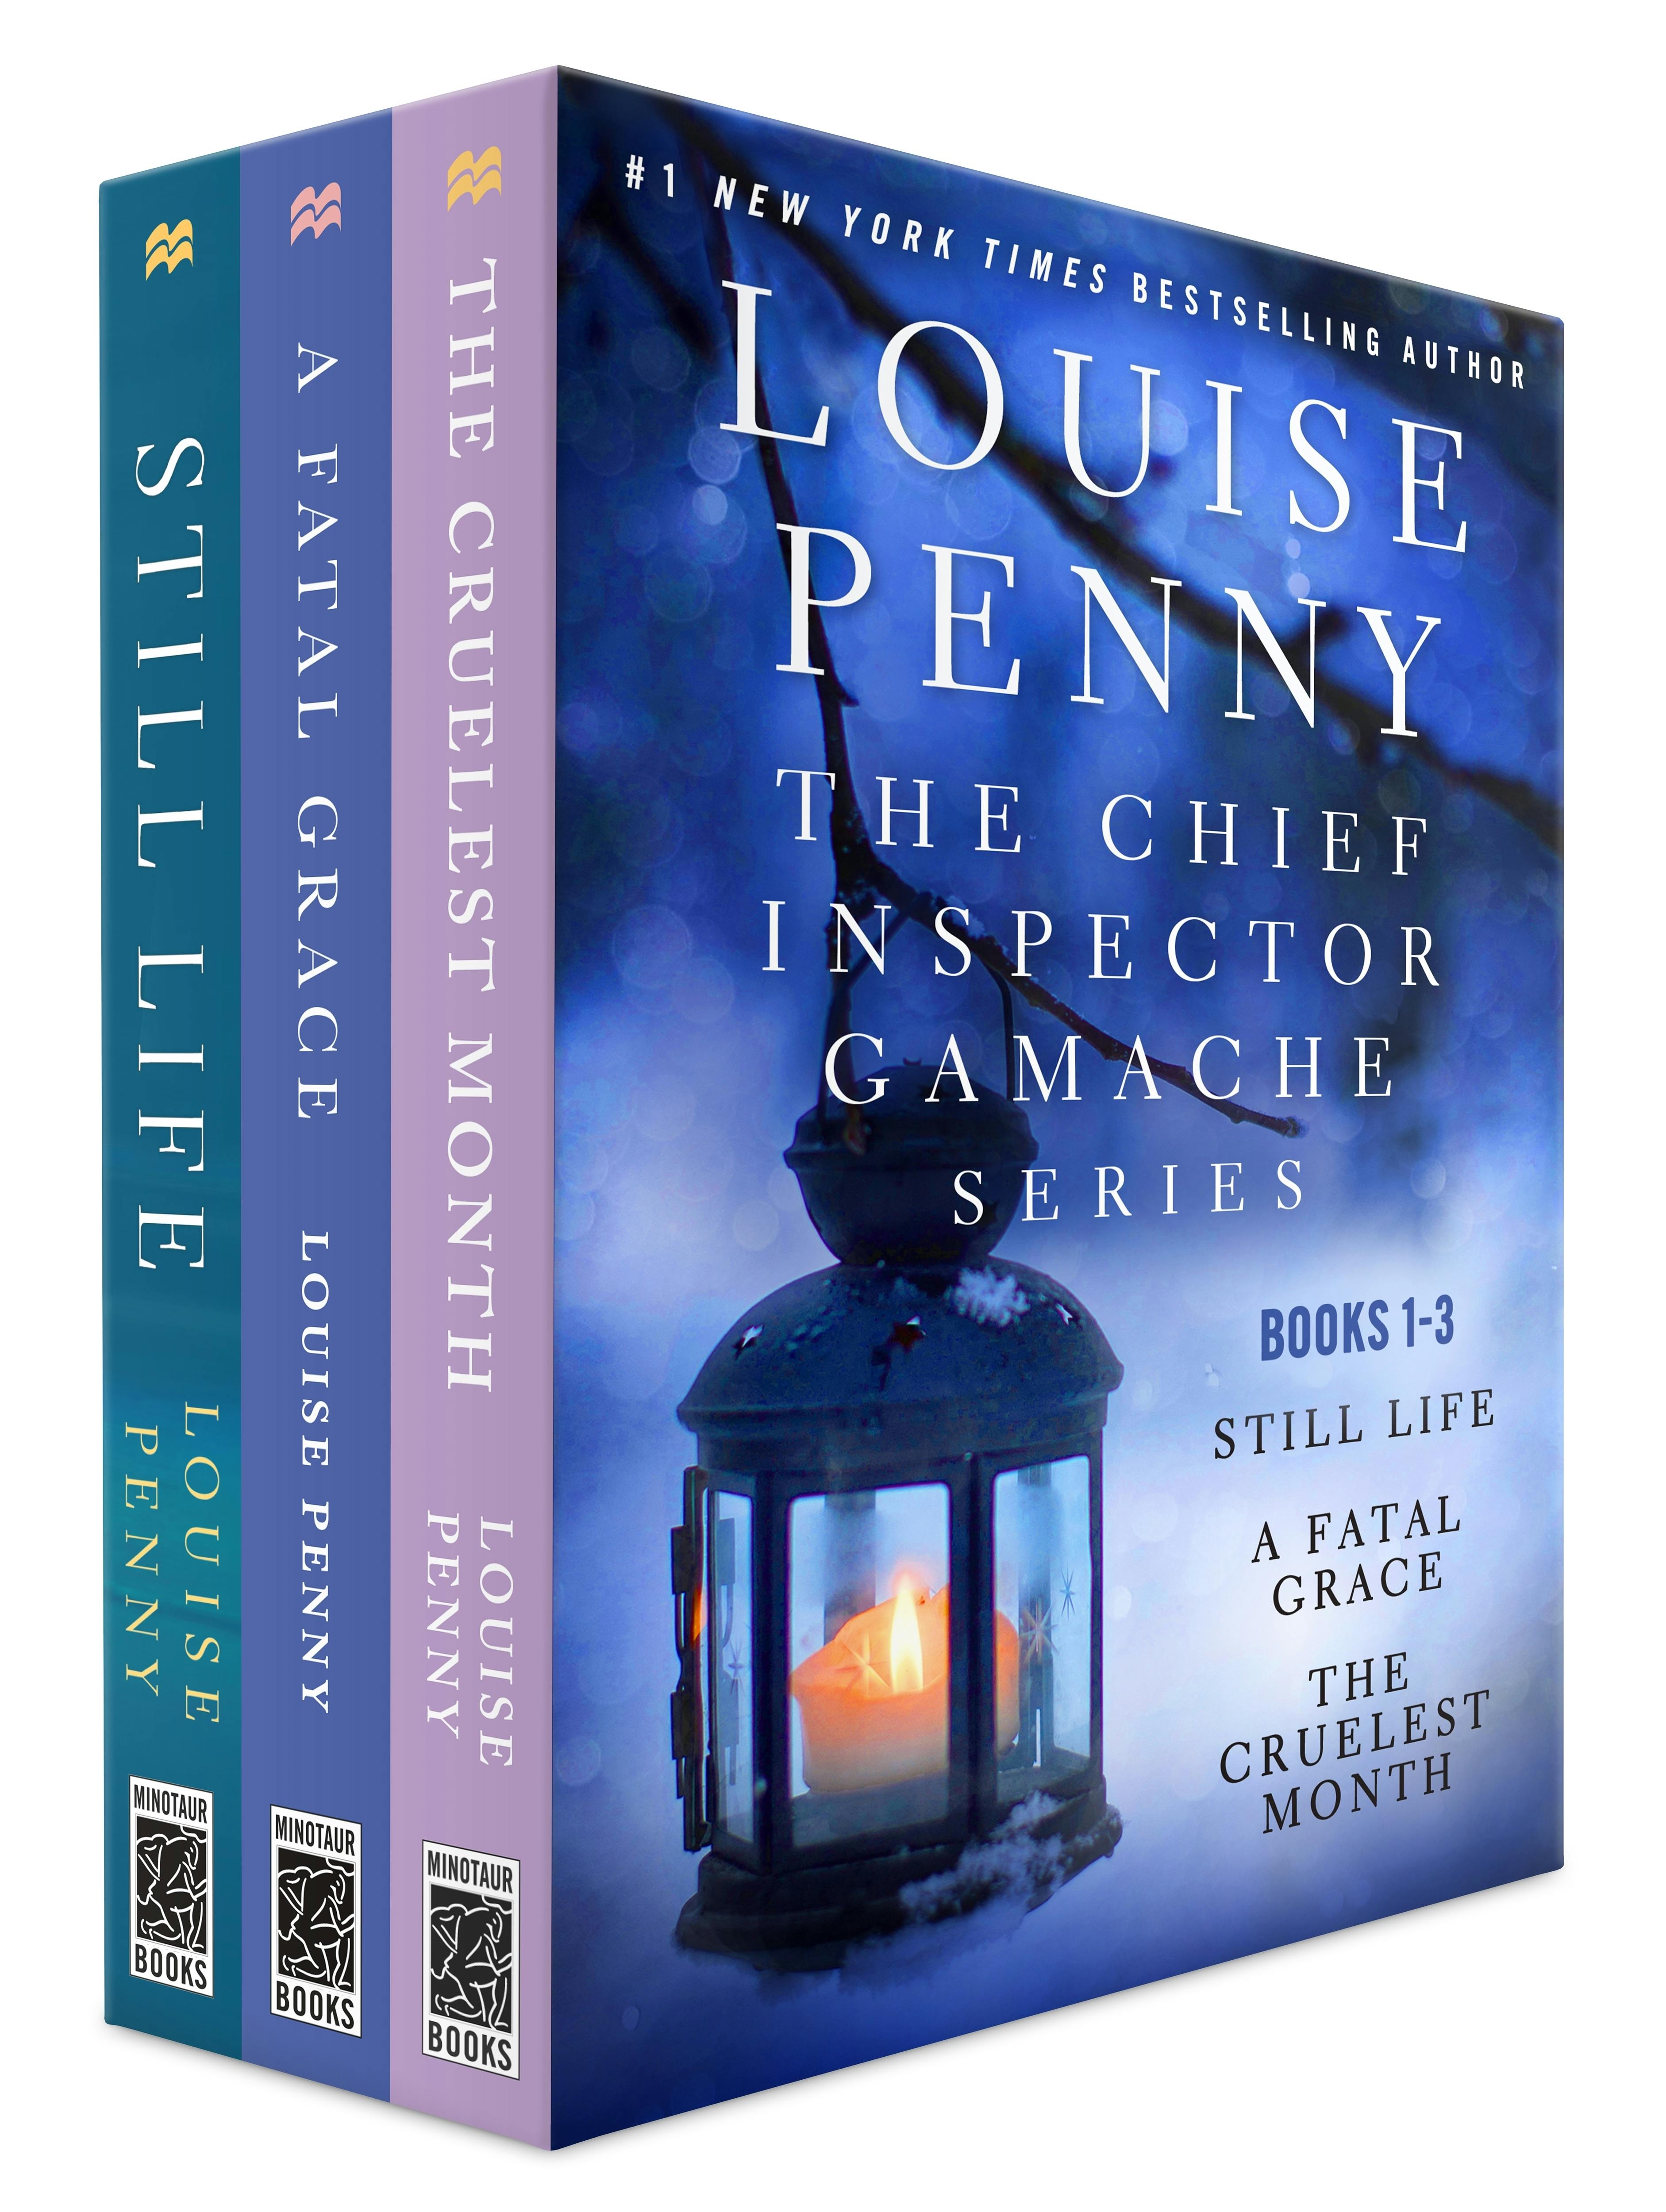 Louise Penny, Biography, Books, Inspector Gamache, Three Pines, & Facts